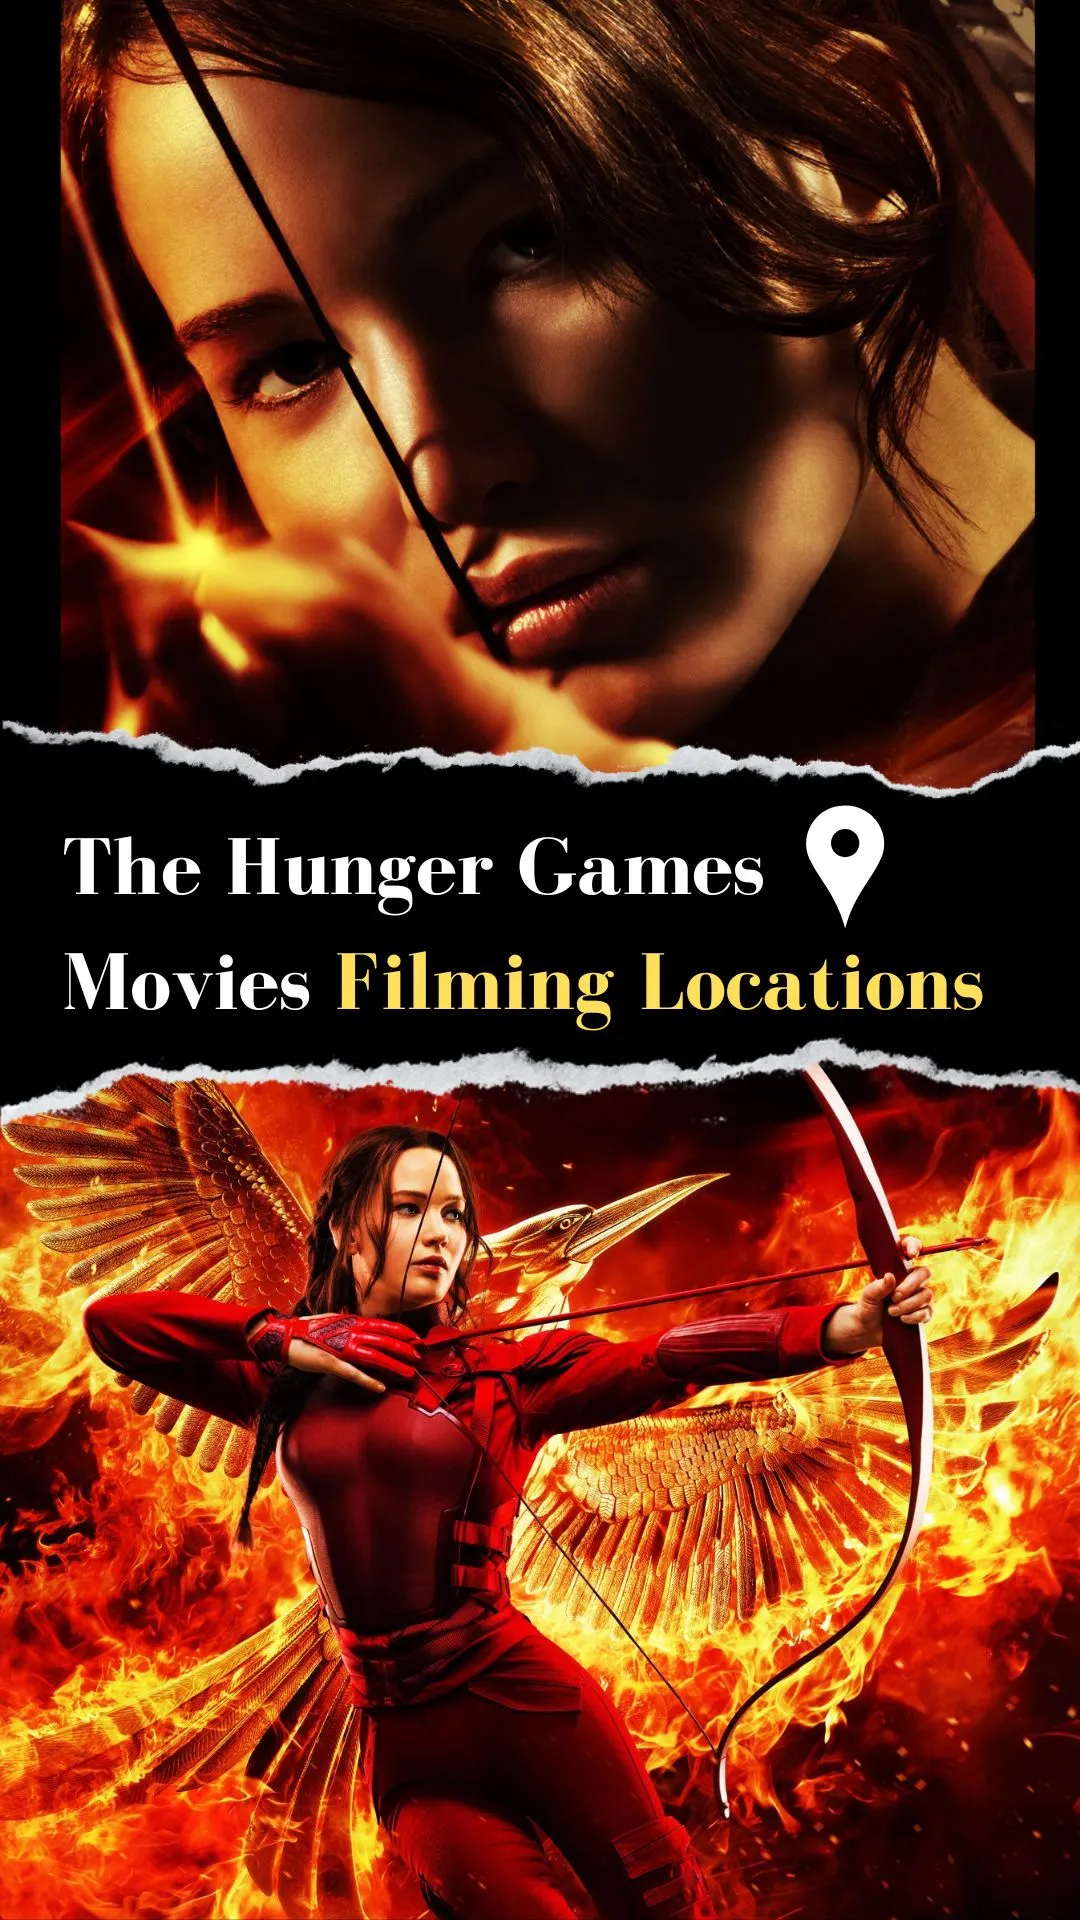 The Hunger Games Movies Filming Locations